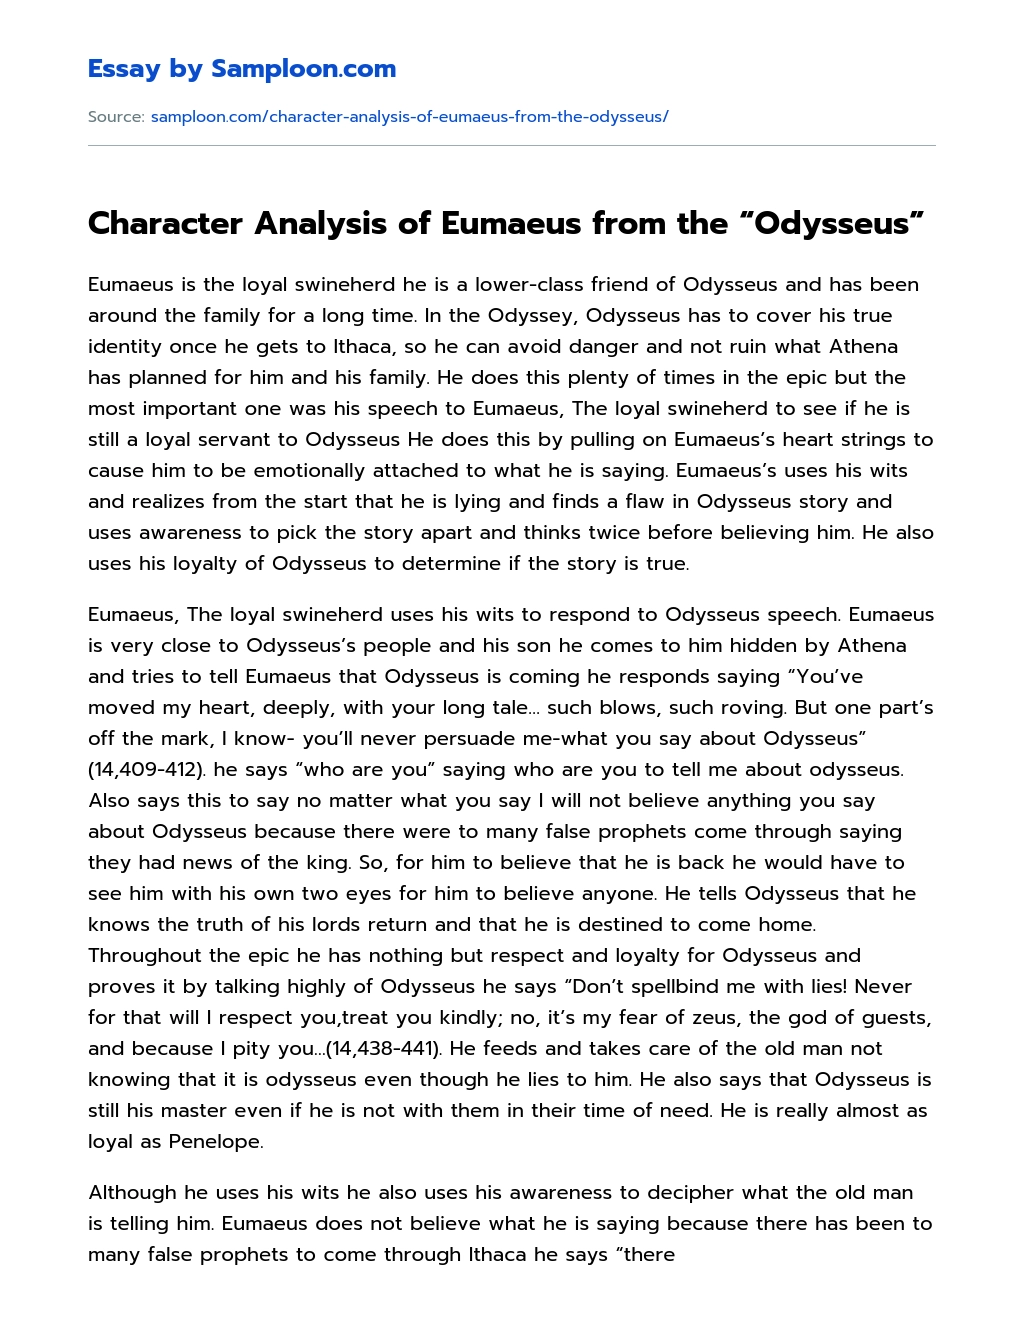 Character Analysis of Eumaeus from the “Odysseus” essay